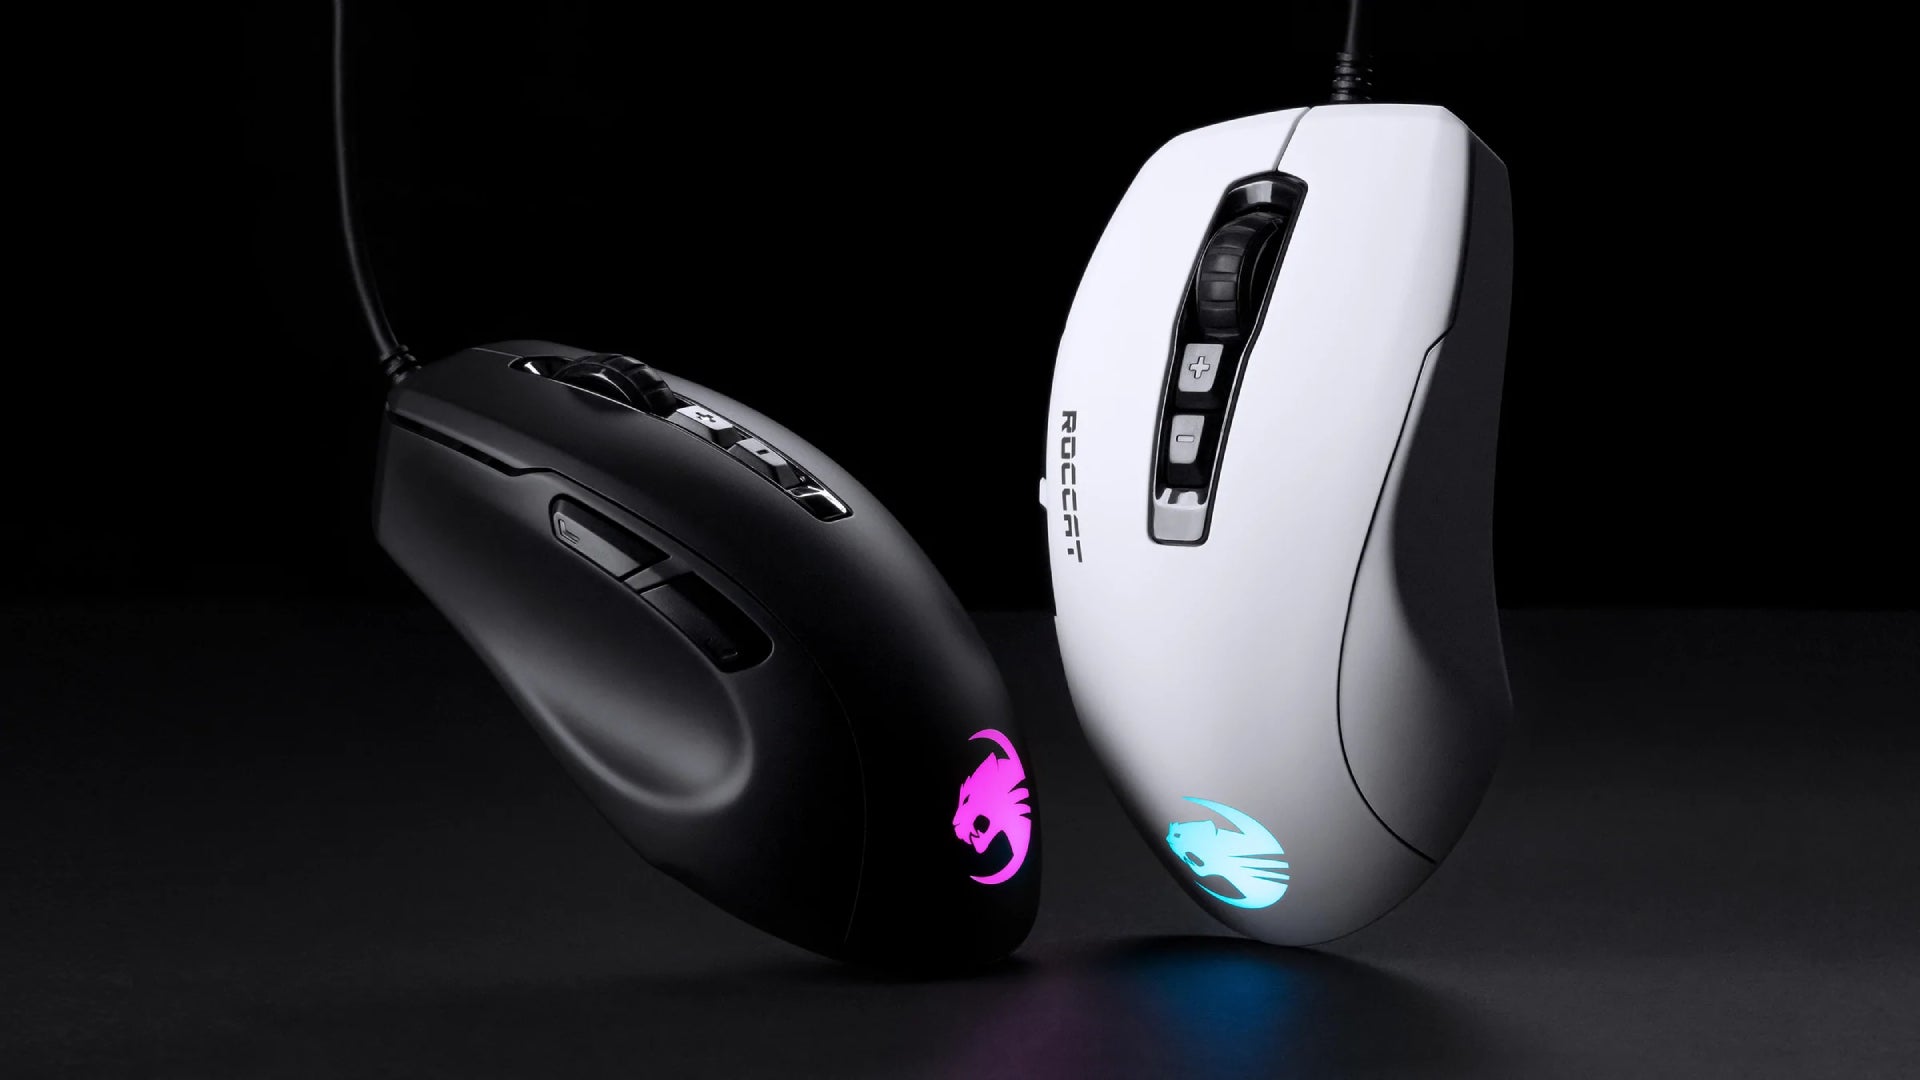 Image for Get an ultra-light gaming mouse for just £20 at The Game Collection